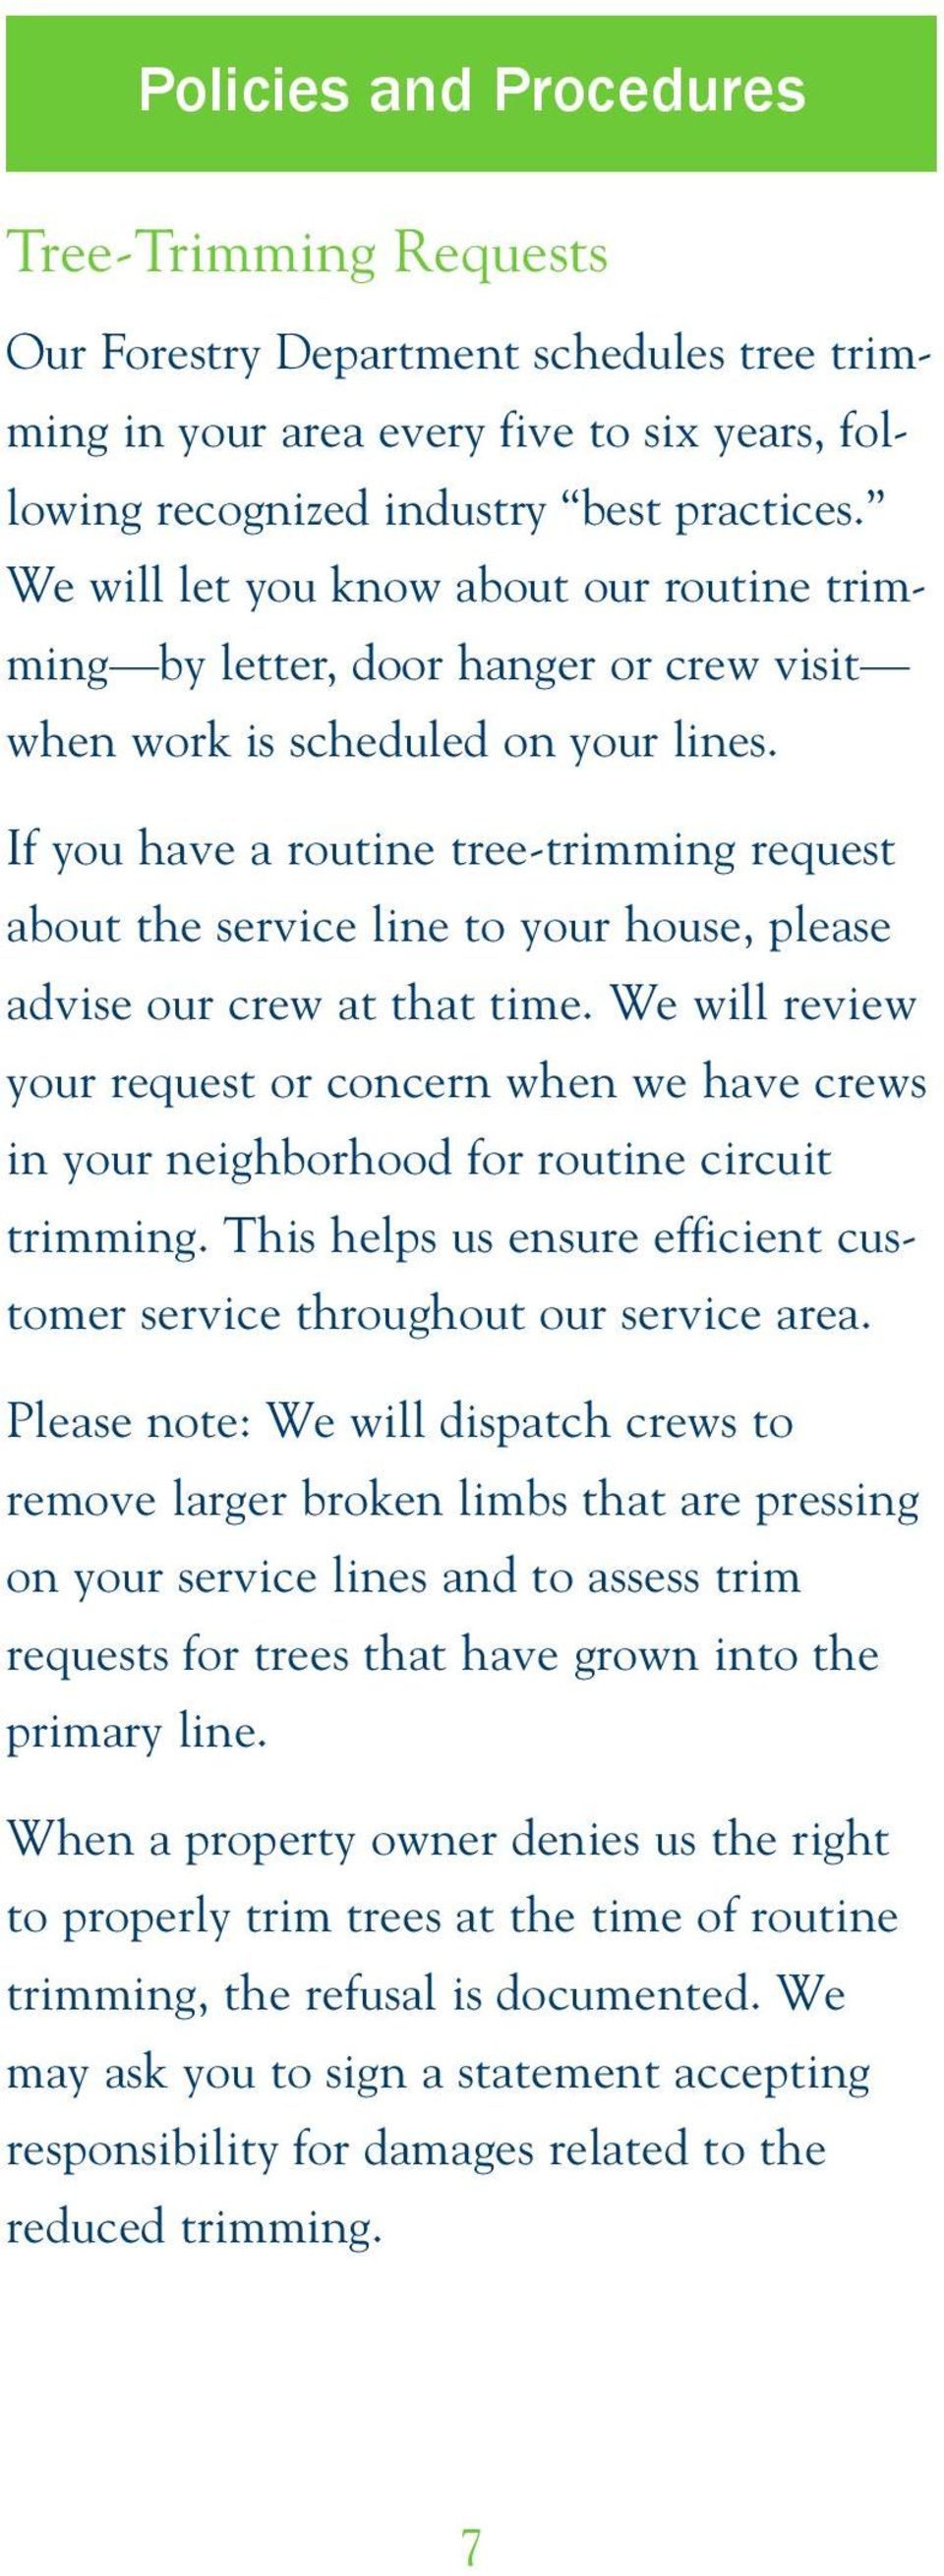 If you have a routine tree-trimming request about the service line to your house, please advise our crew at that time.